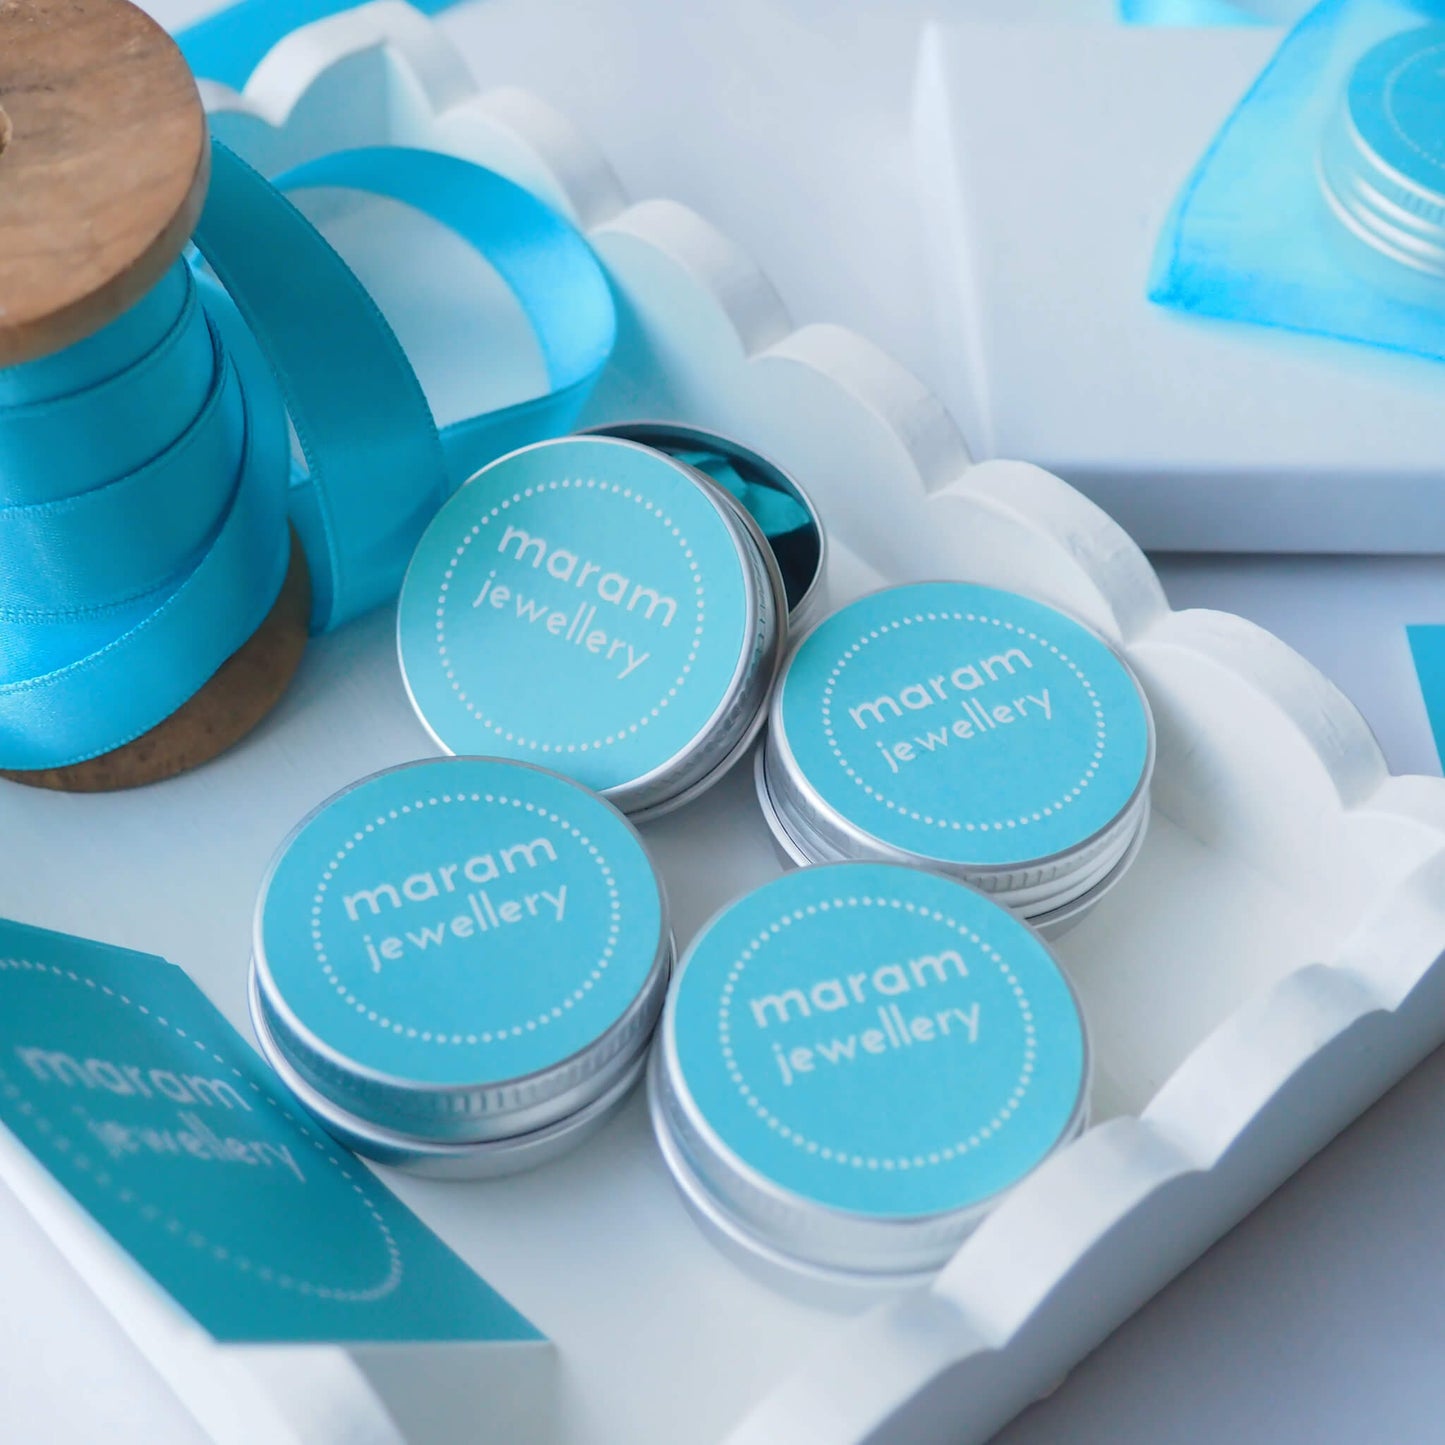 maram jewellery packaging. Small round aluminium tins with turquoise lid with maram jewellery logo. Recyclable and designed for reuse